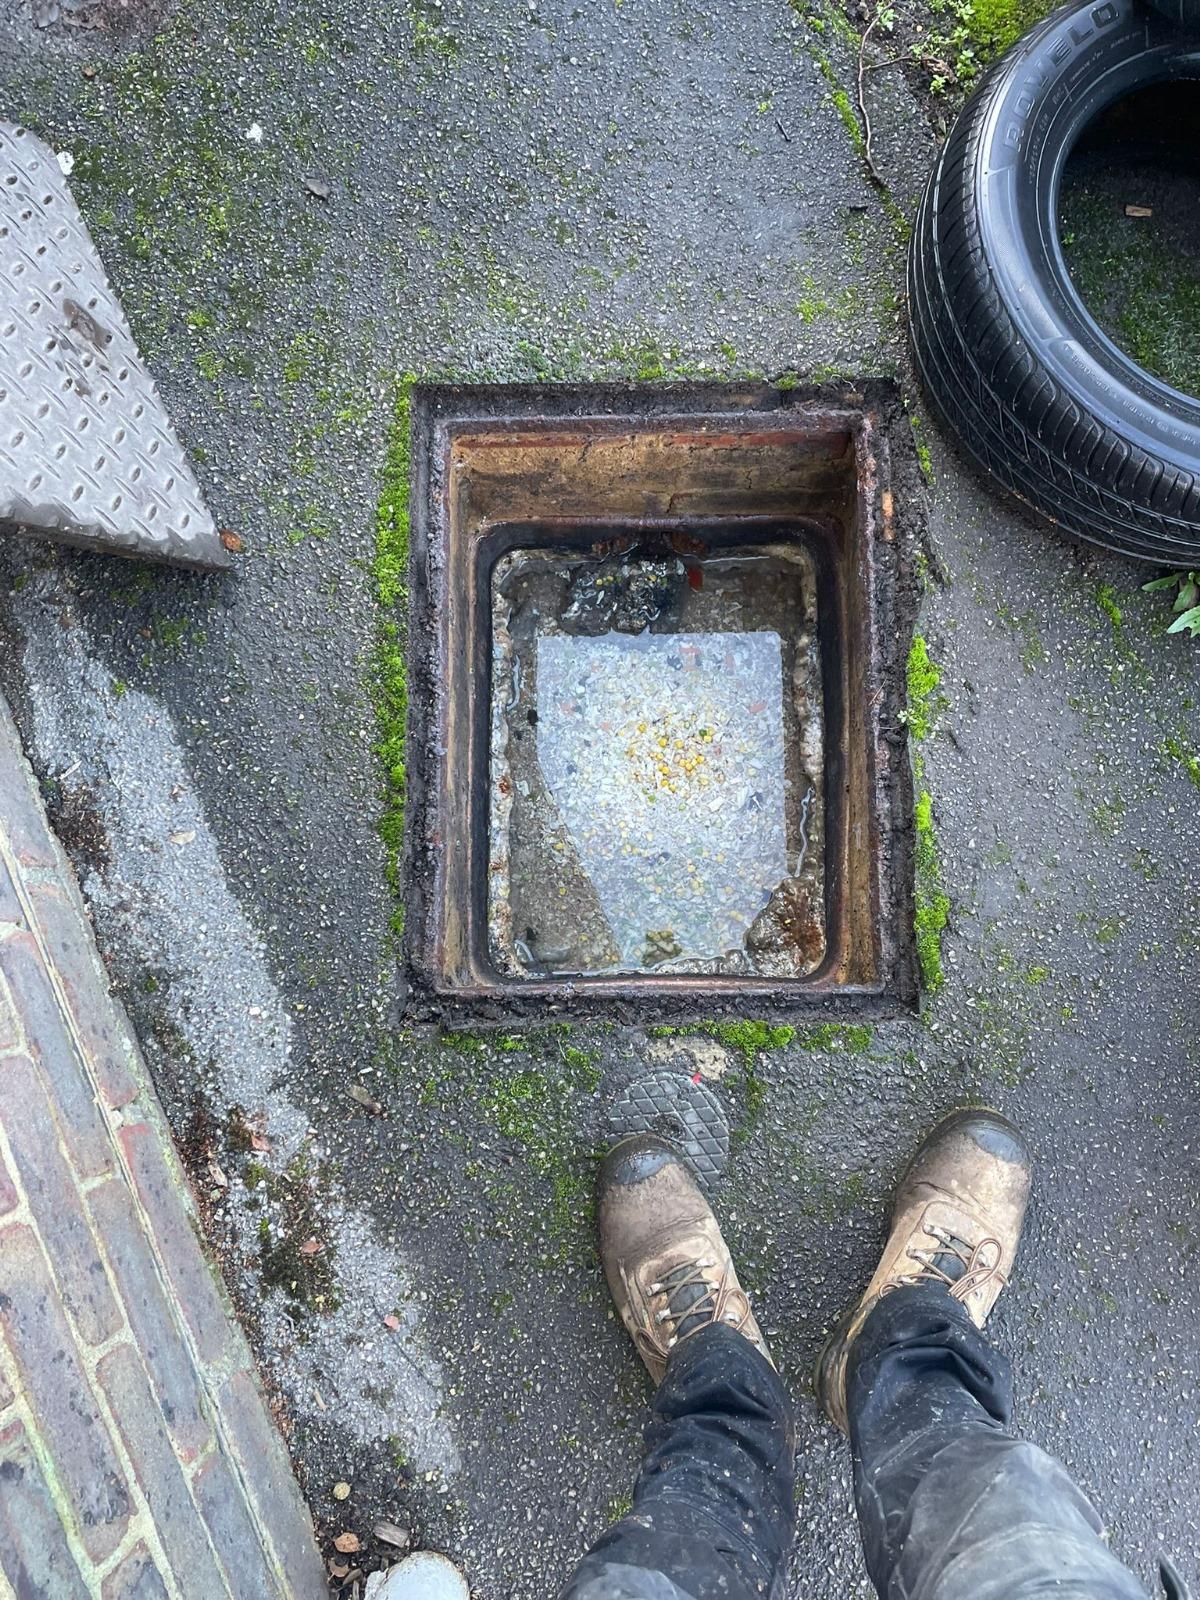 A blocked drain in Guildford, Surrey